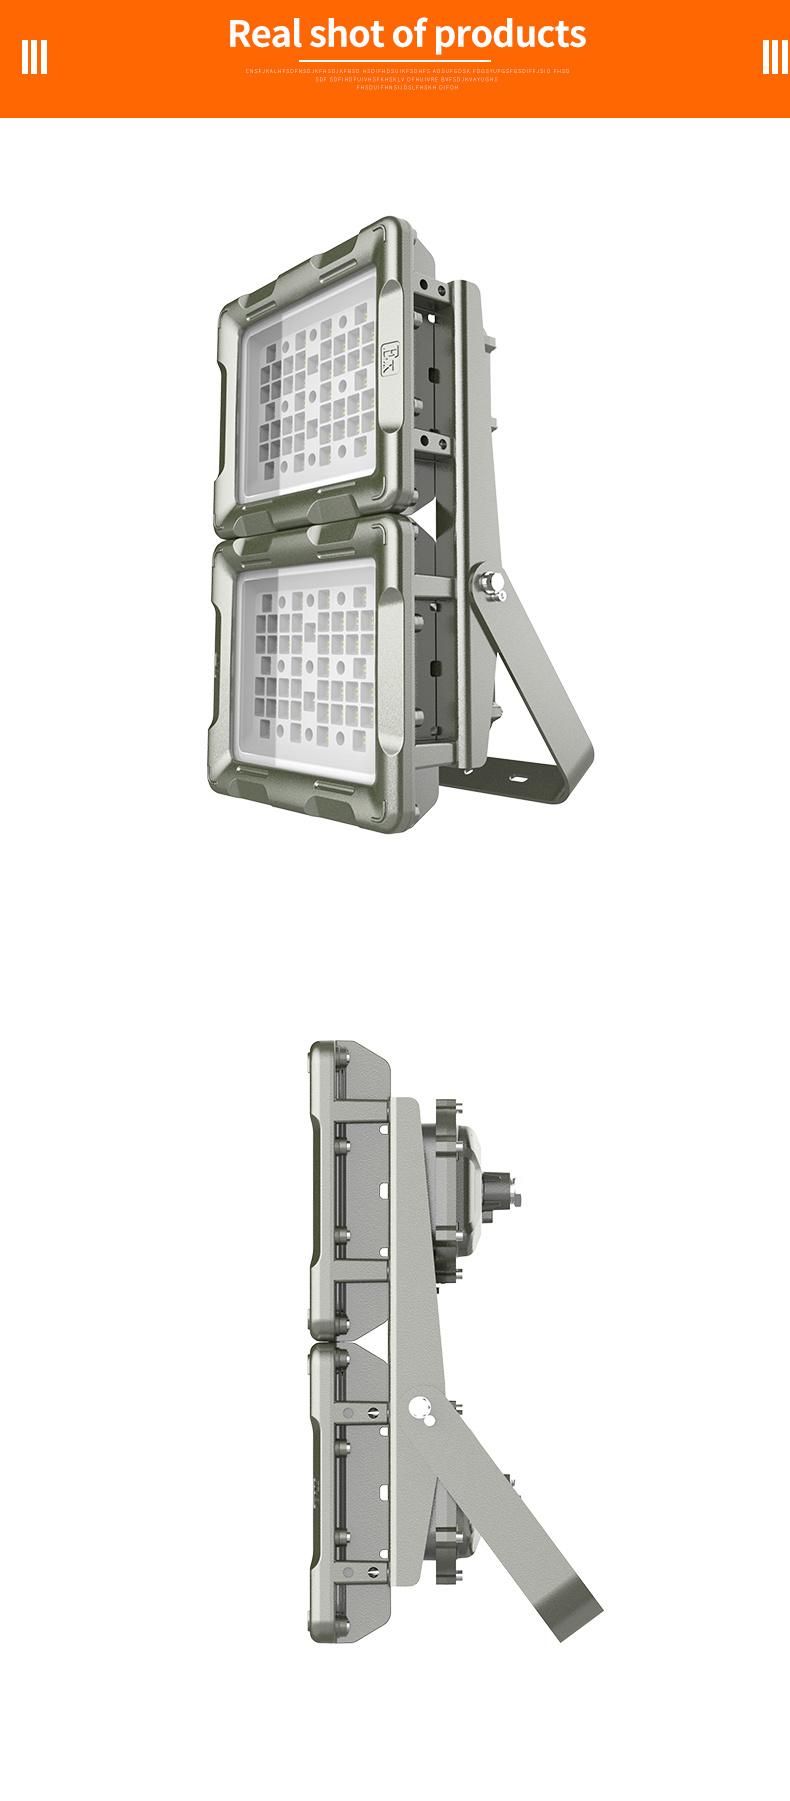 Atex / Iecex Zone2 Hot Sell High Power 400W Explosion Proof Light Parts LED Floodlight